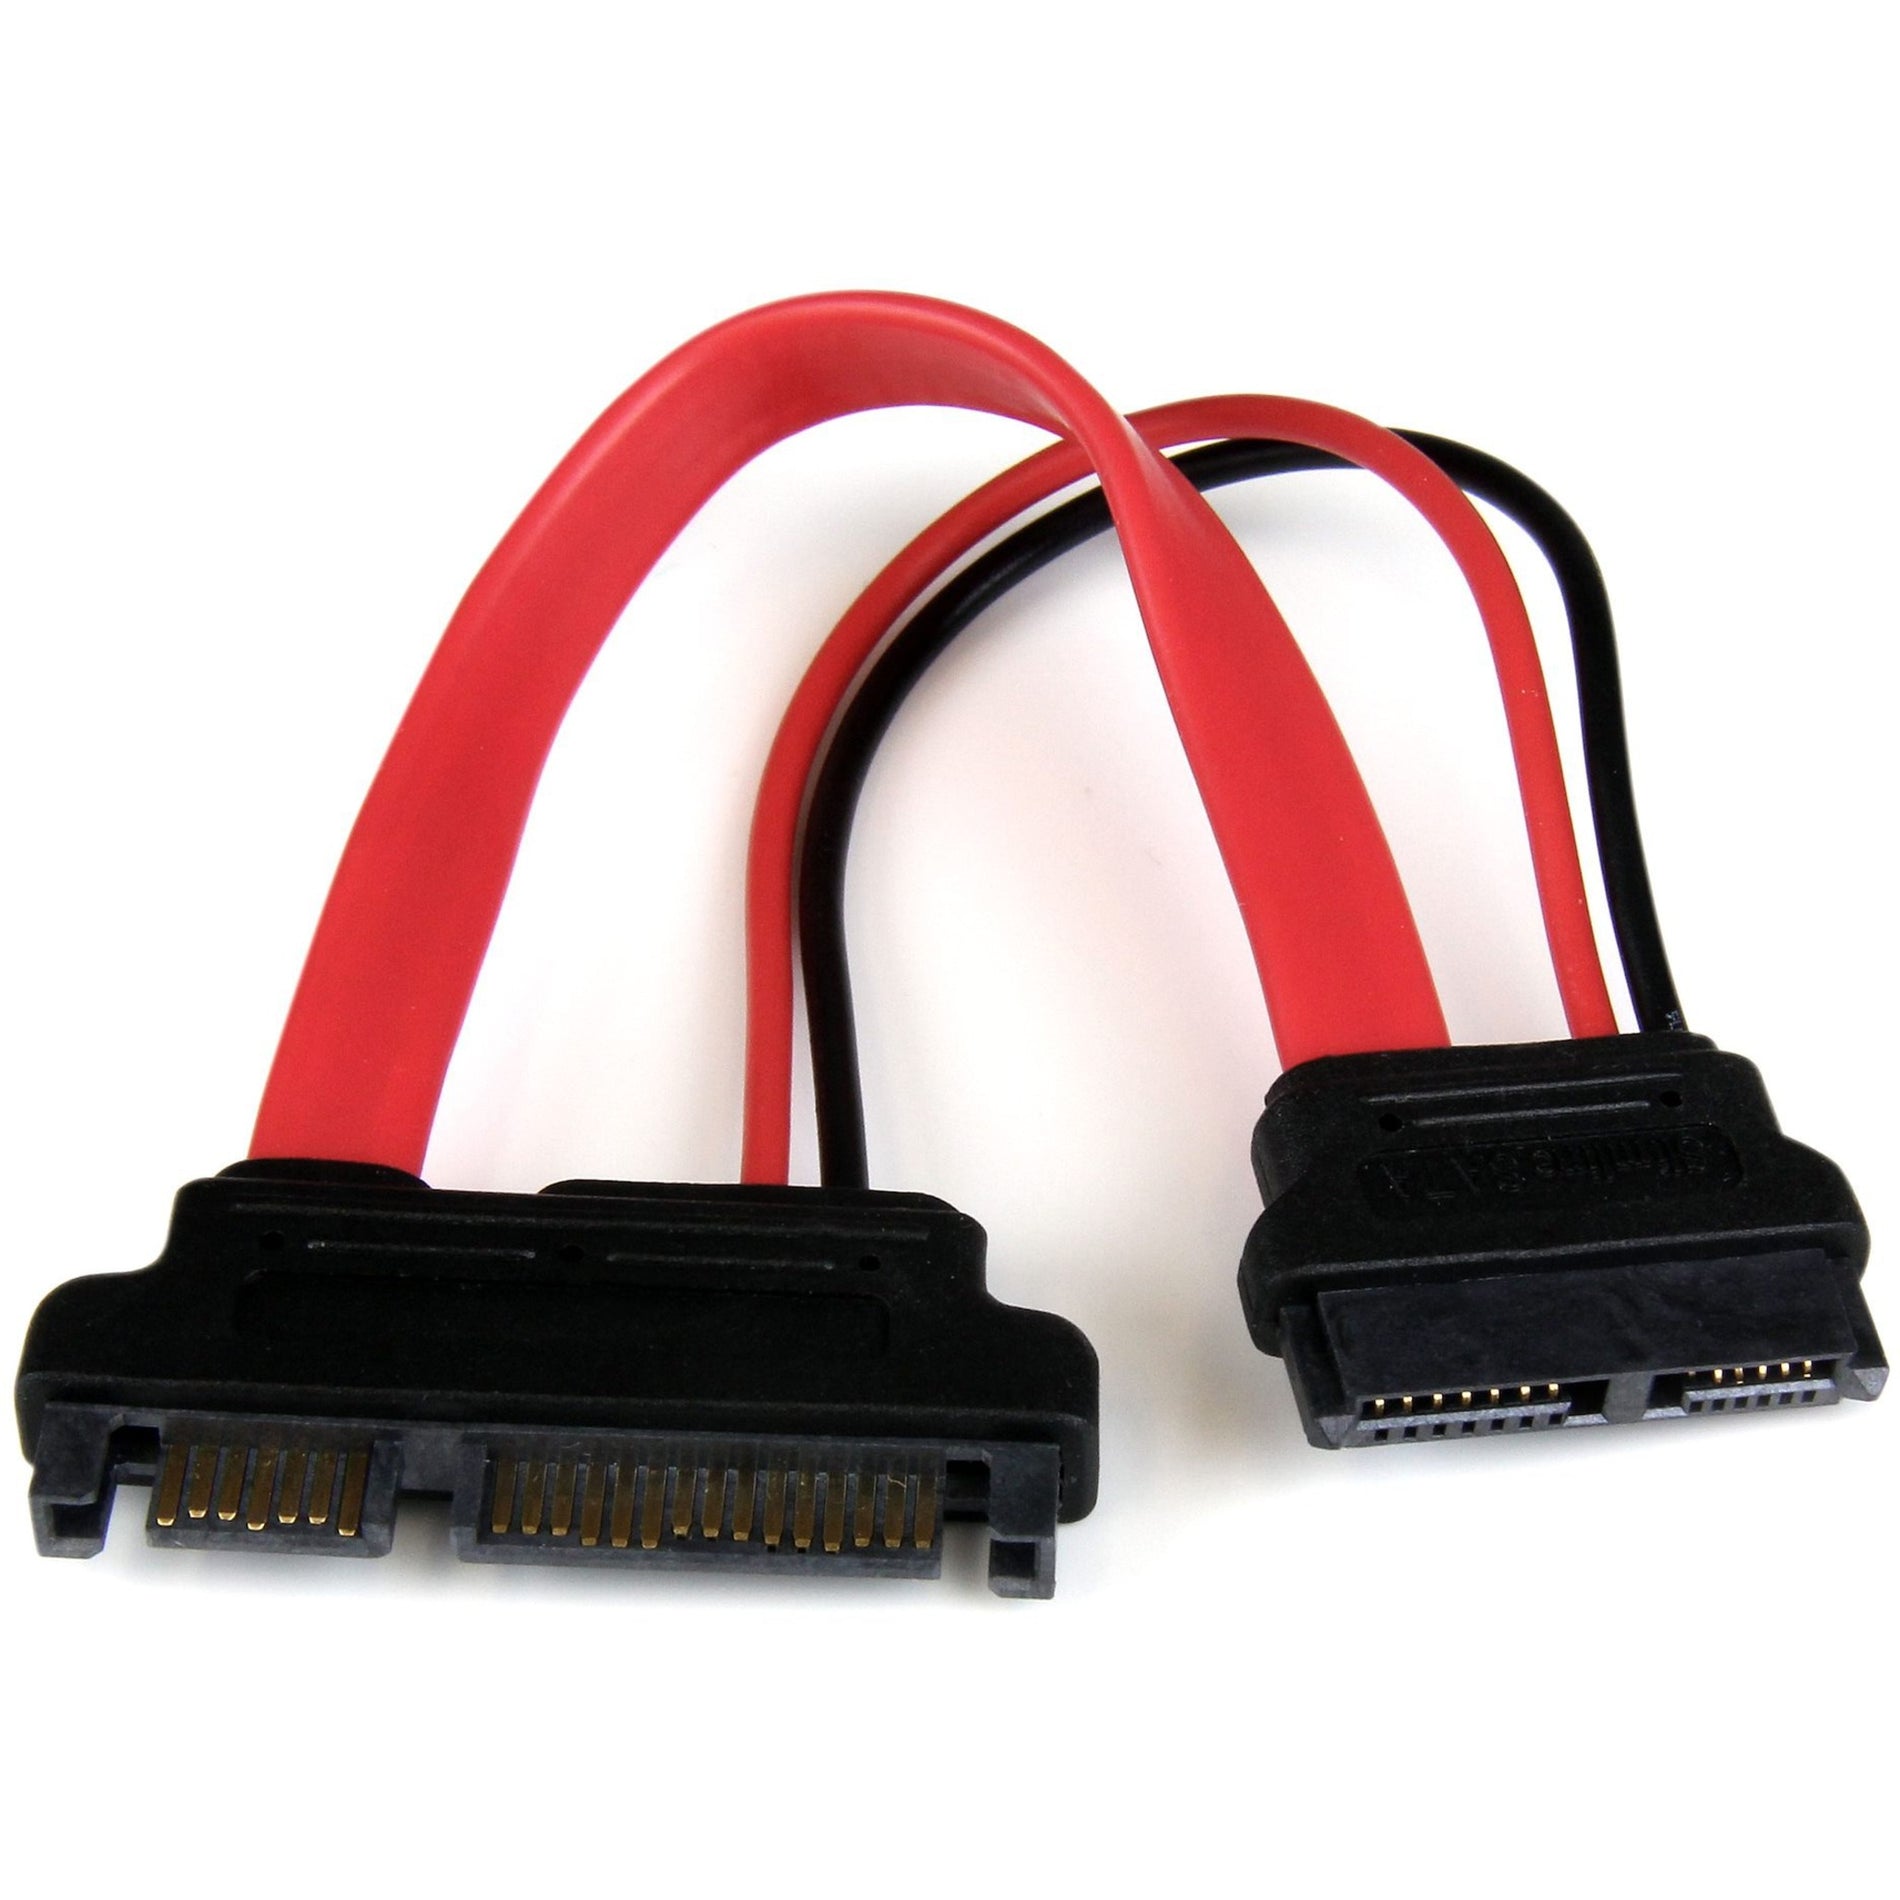 StarTech.com SLSATAADAP6 6in Slimline SATA to SATA Adapter with Power - F/M, Copper Conductor, 18 AWG, Red